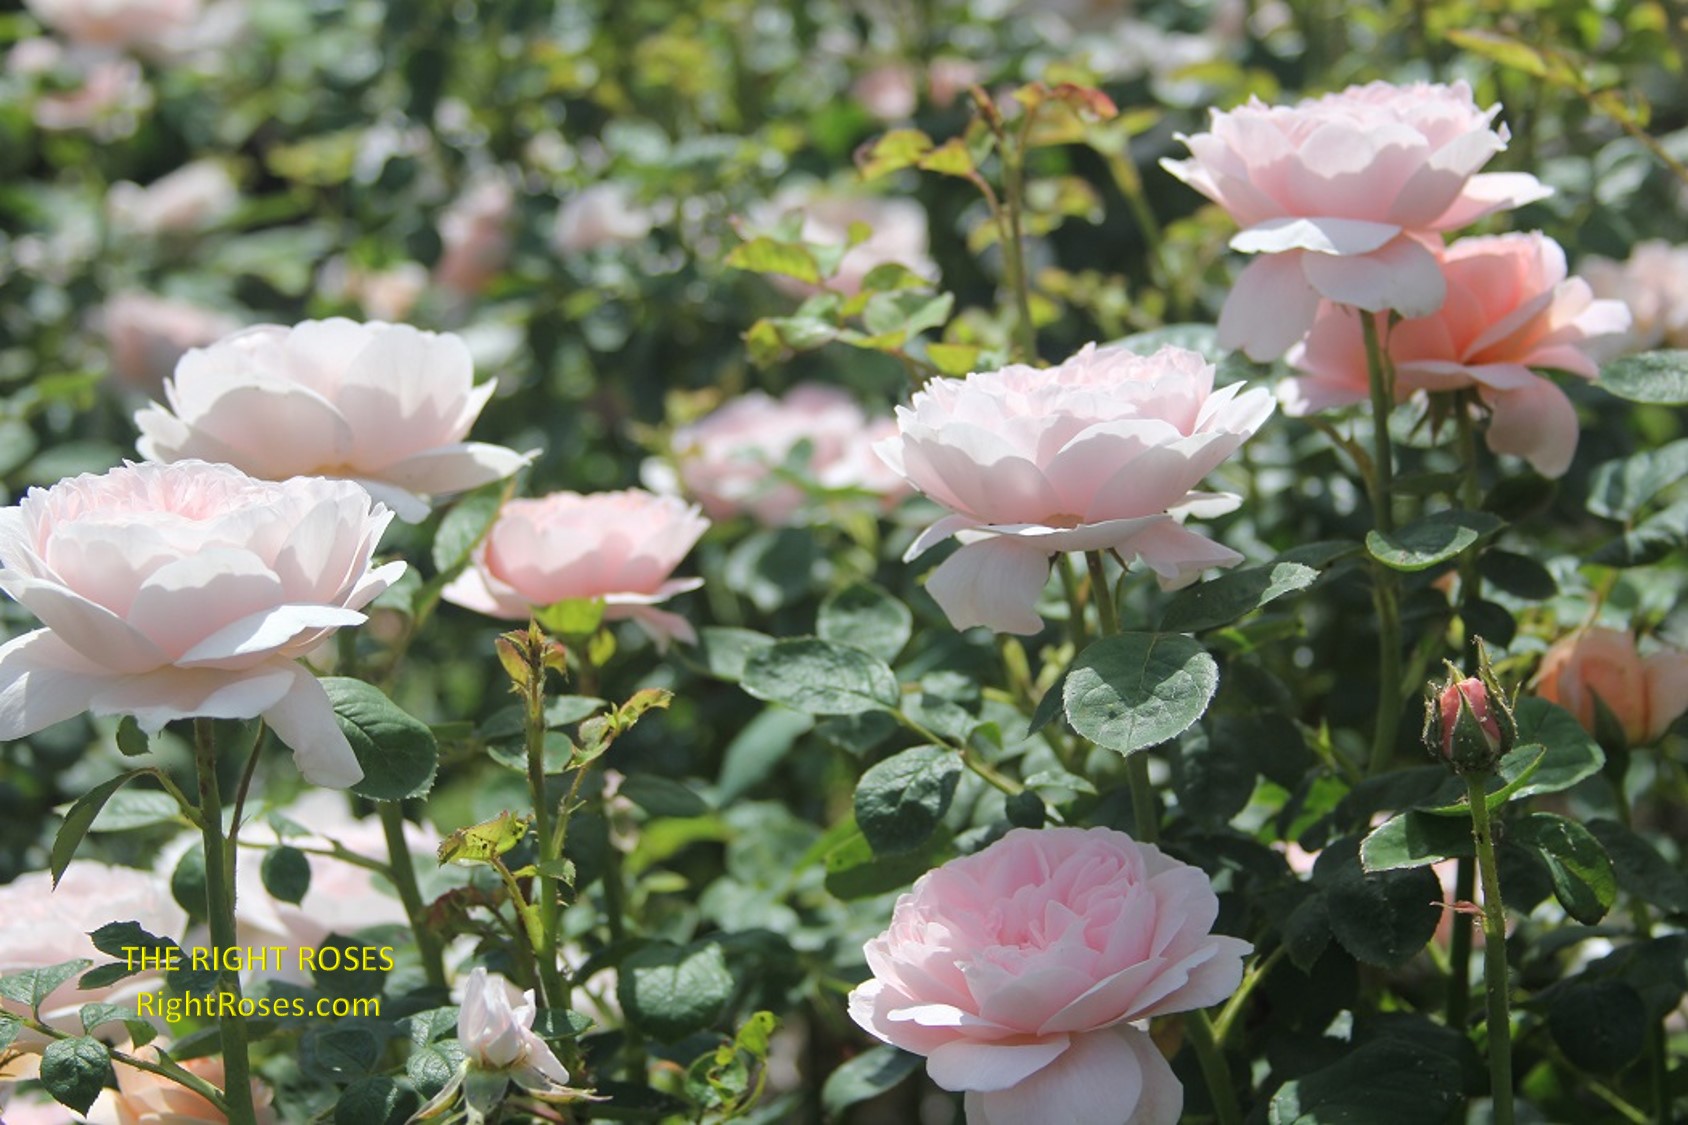 Queen of Sweden rose review the right roses score best top garden store david austin english roses rose products rose rating the right leap rose food fertilizer